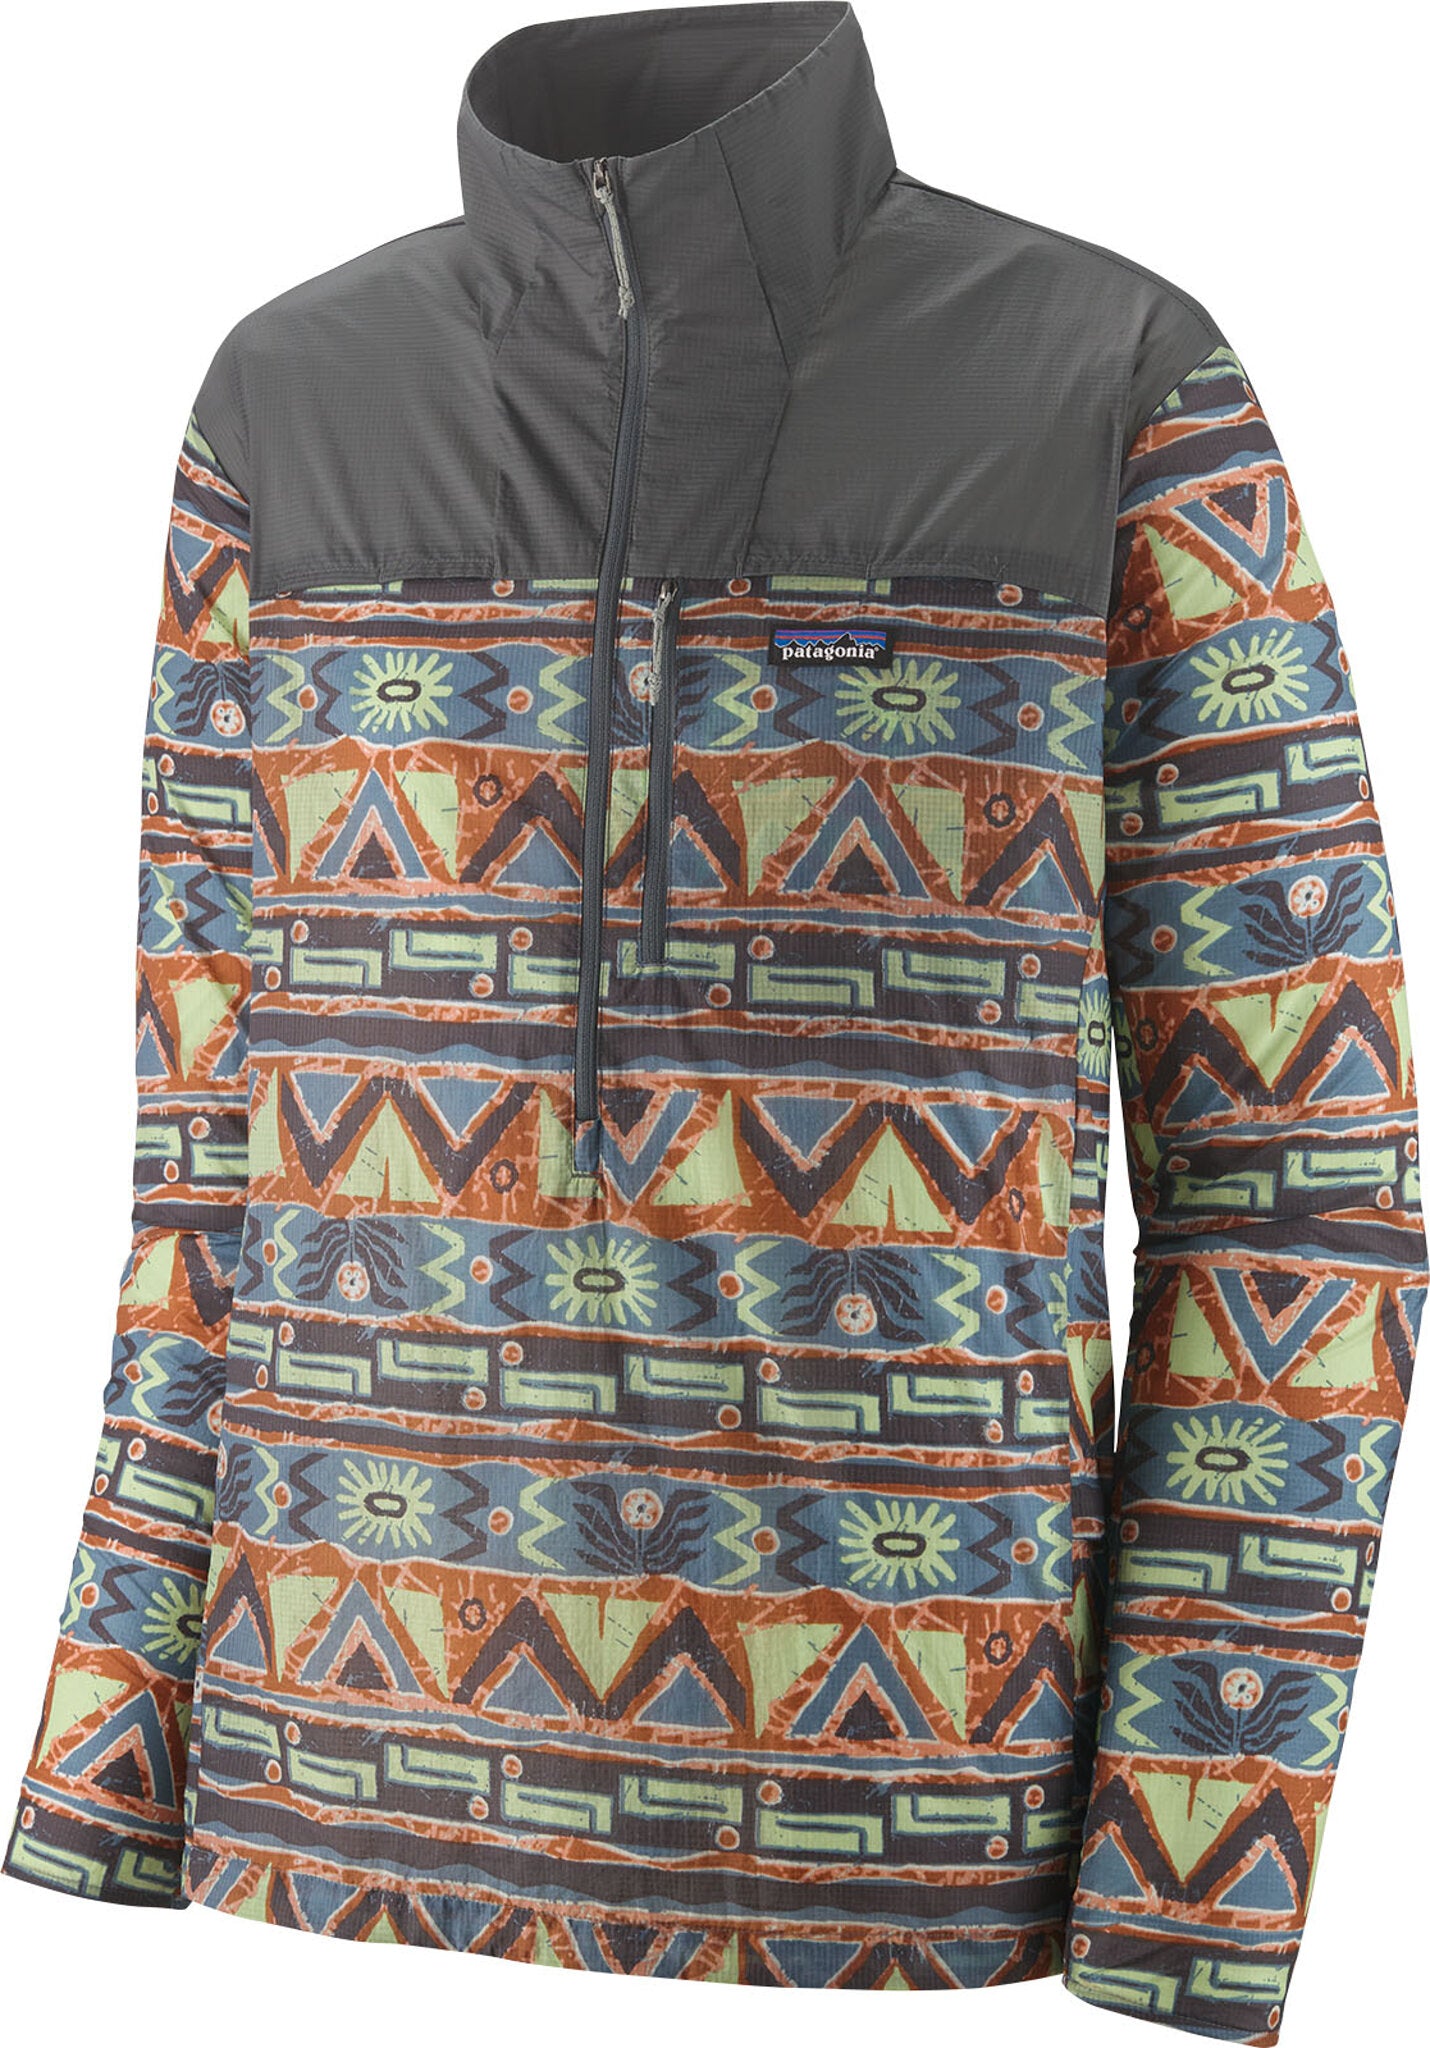 Patagonia Houdini Pullover Review